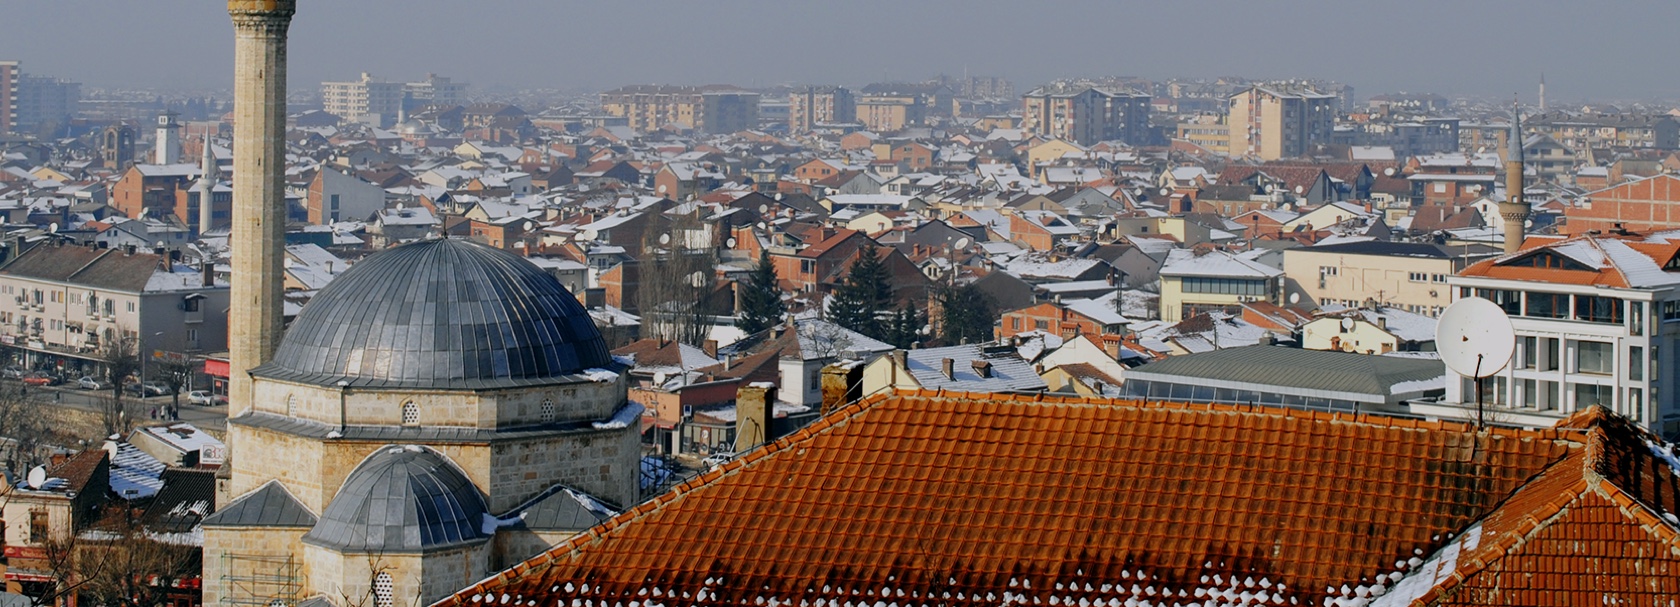 A wide shot of rooftops of residential and apartment buildings in a large city